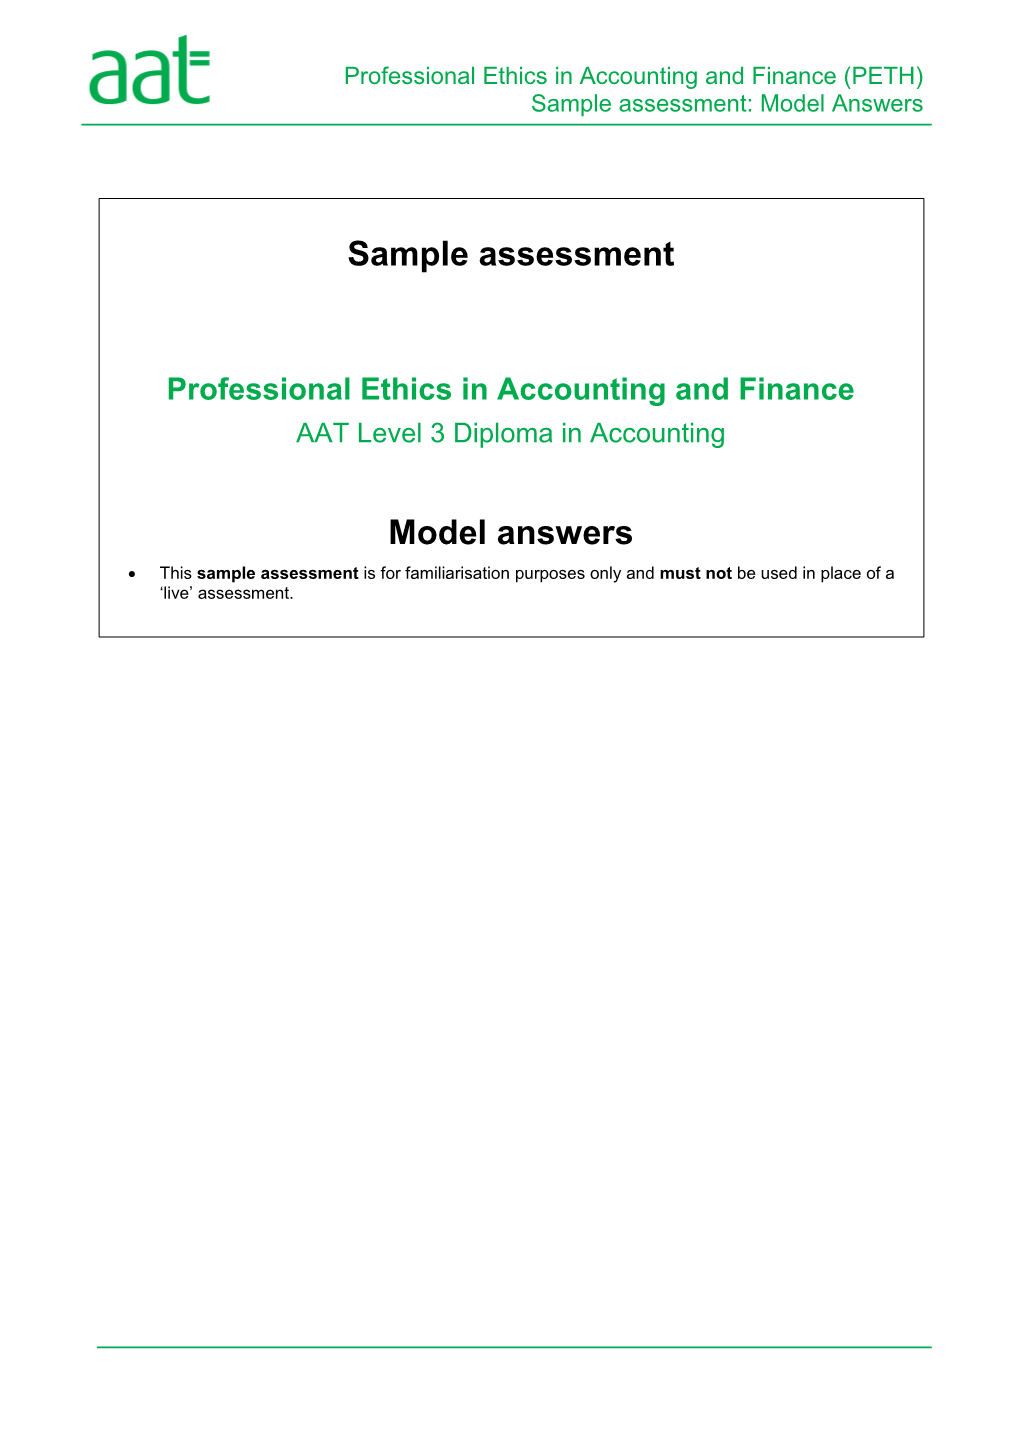 Professional Ethics in Accounting and Finance (PETH)